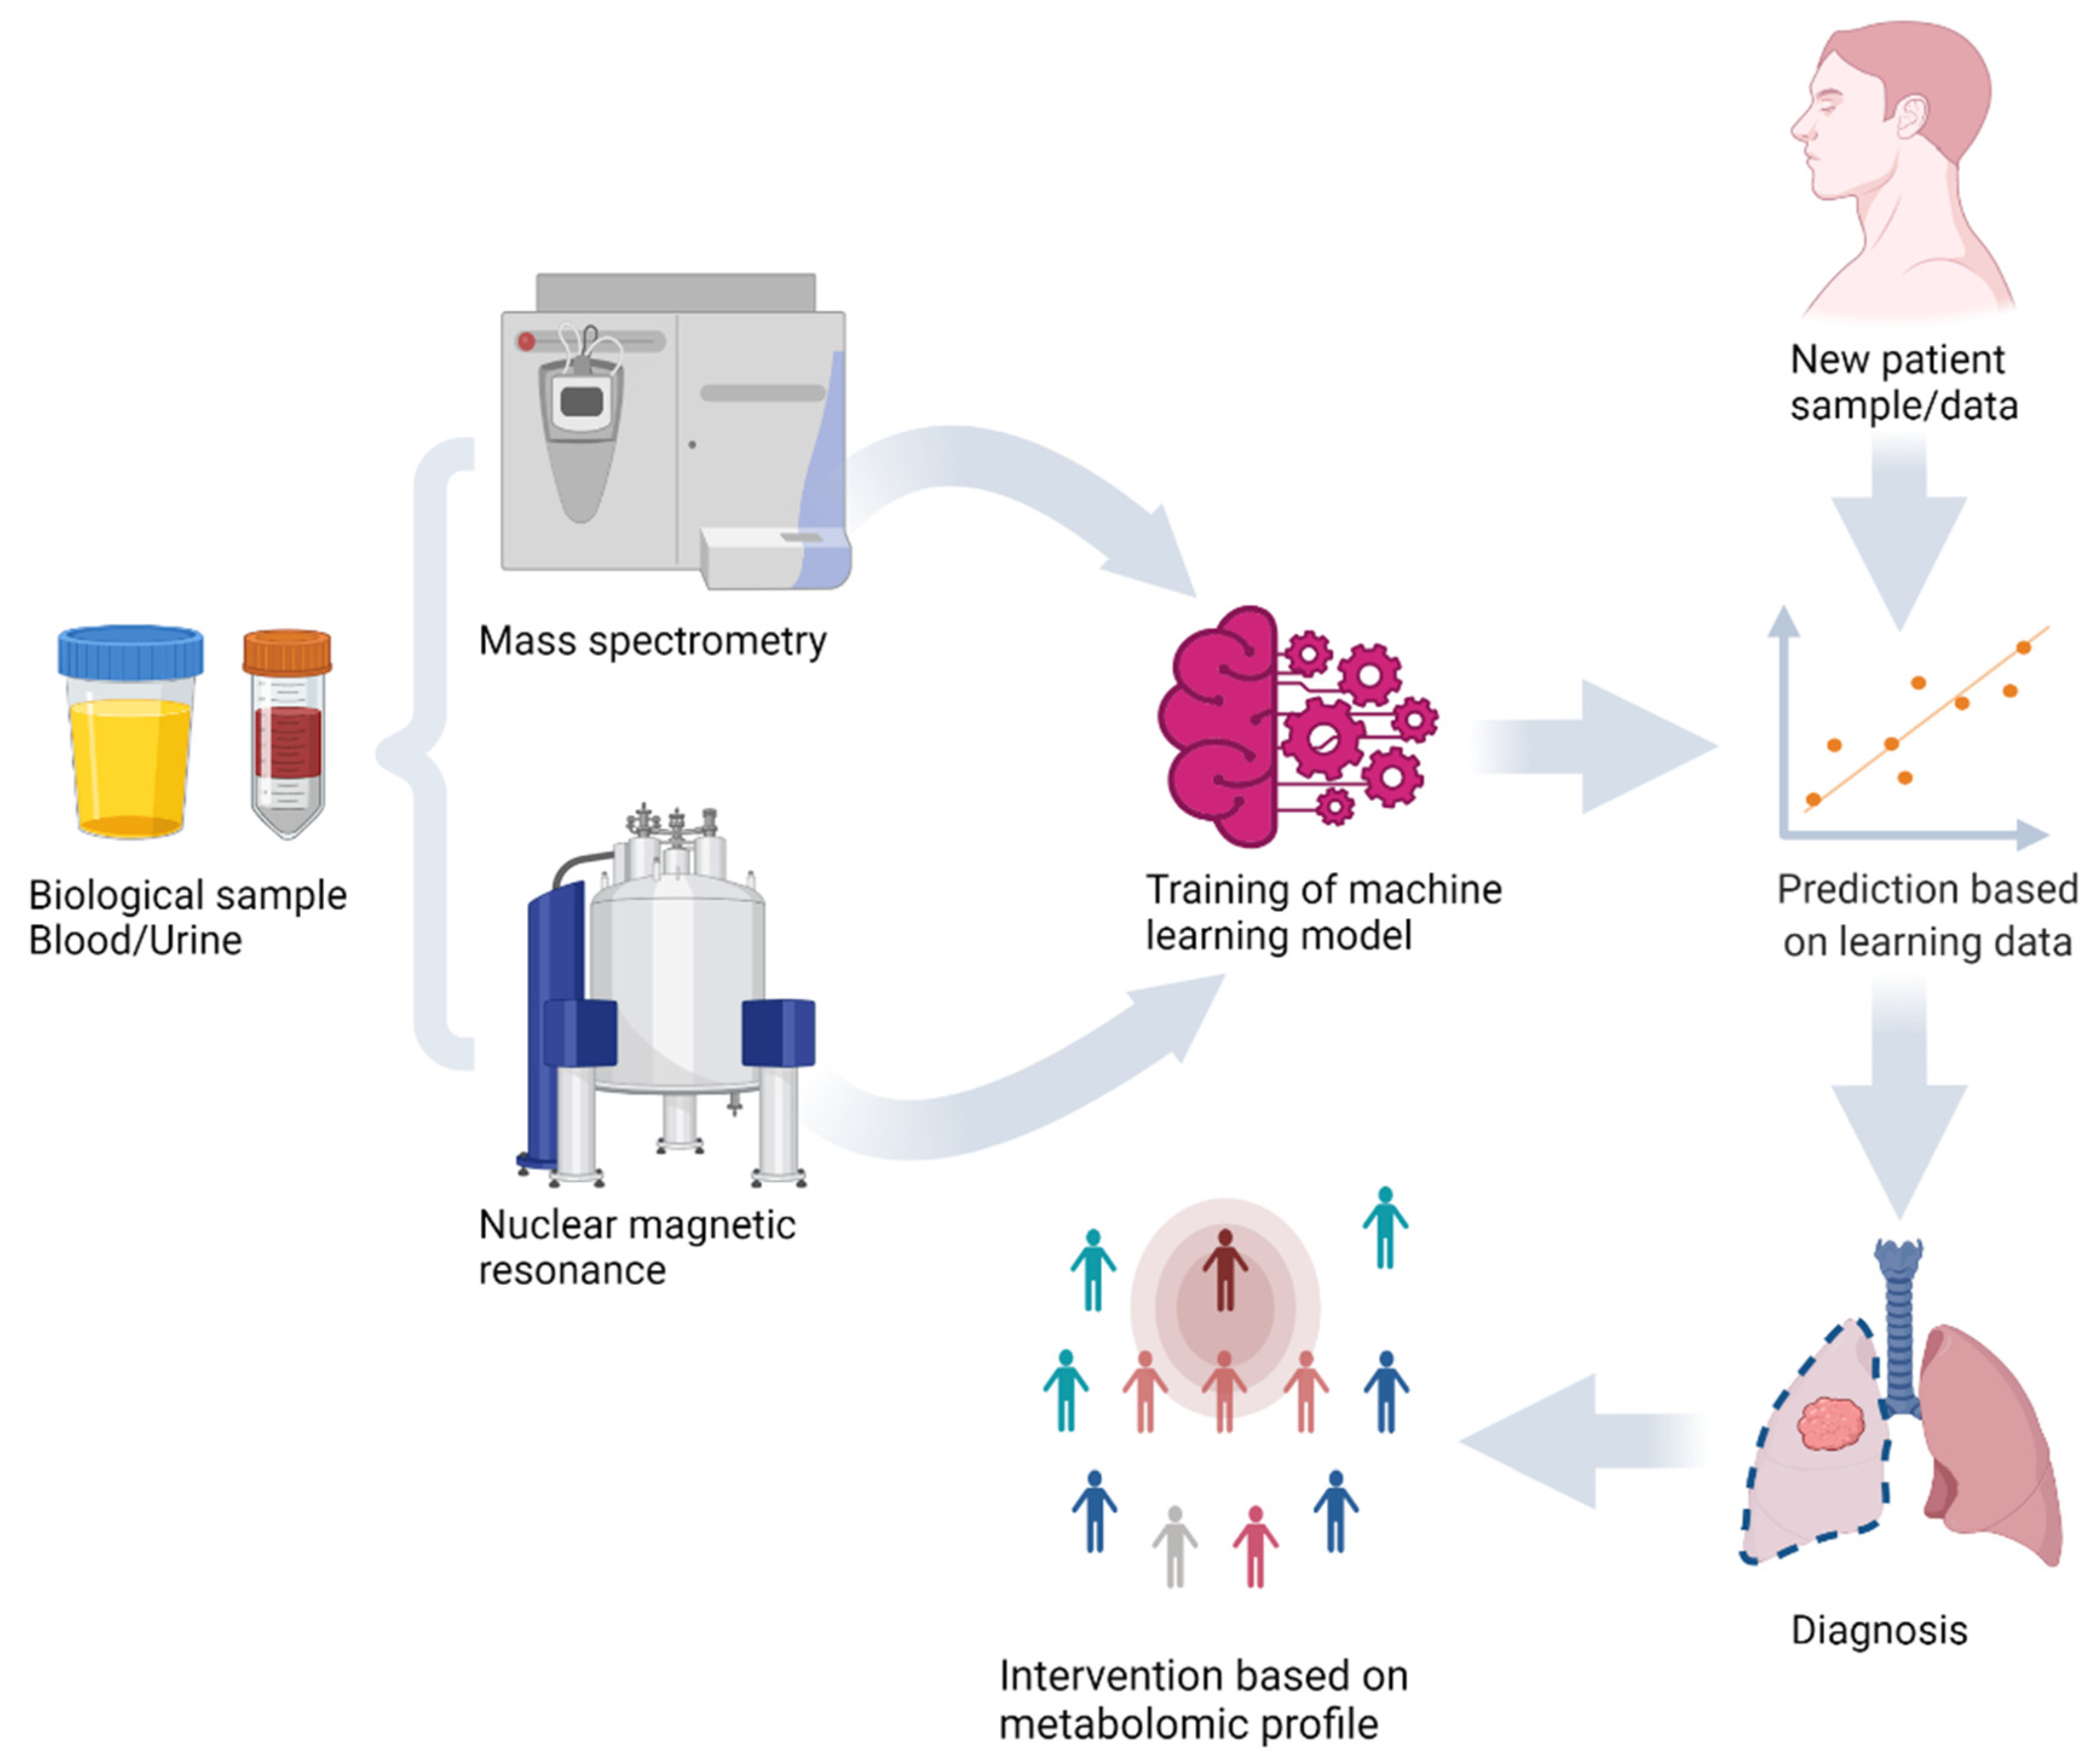 Data mining analyses for precision medicine in acromegaly: a proof